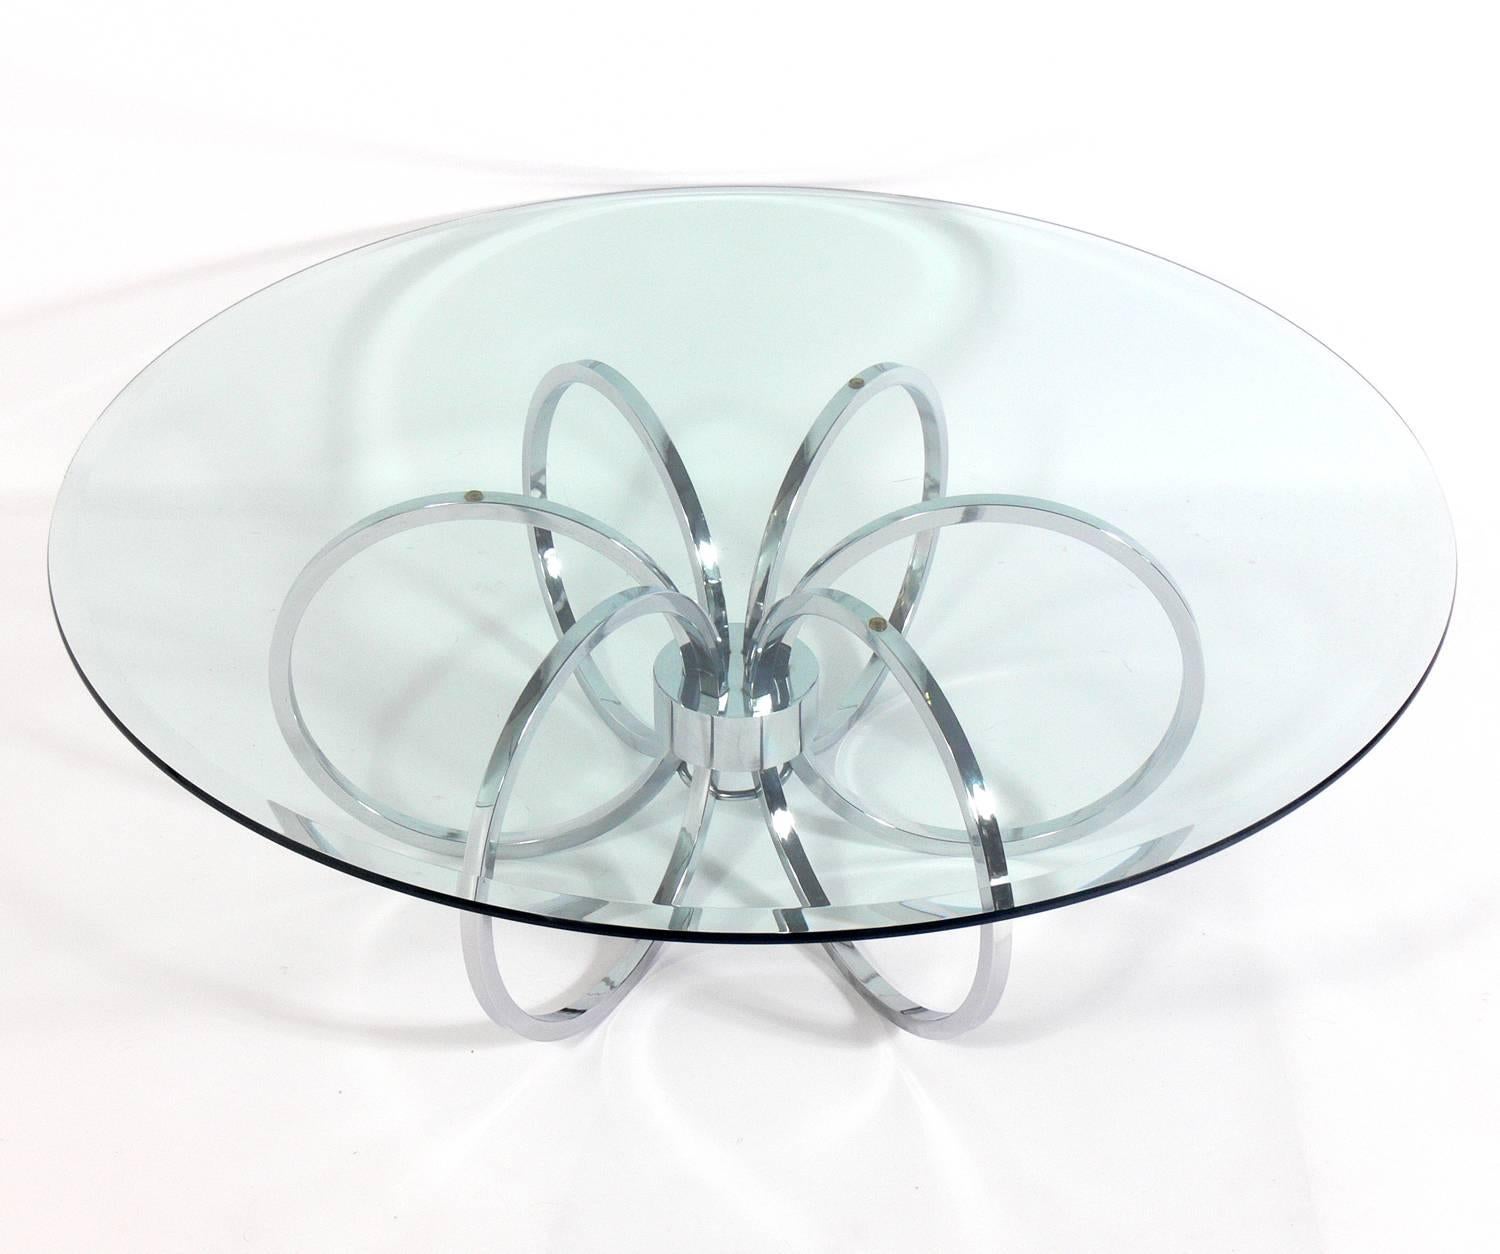 Chrome ring coffee table, in the manner of Milo Baughman, circa 1960s.